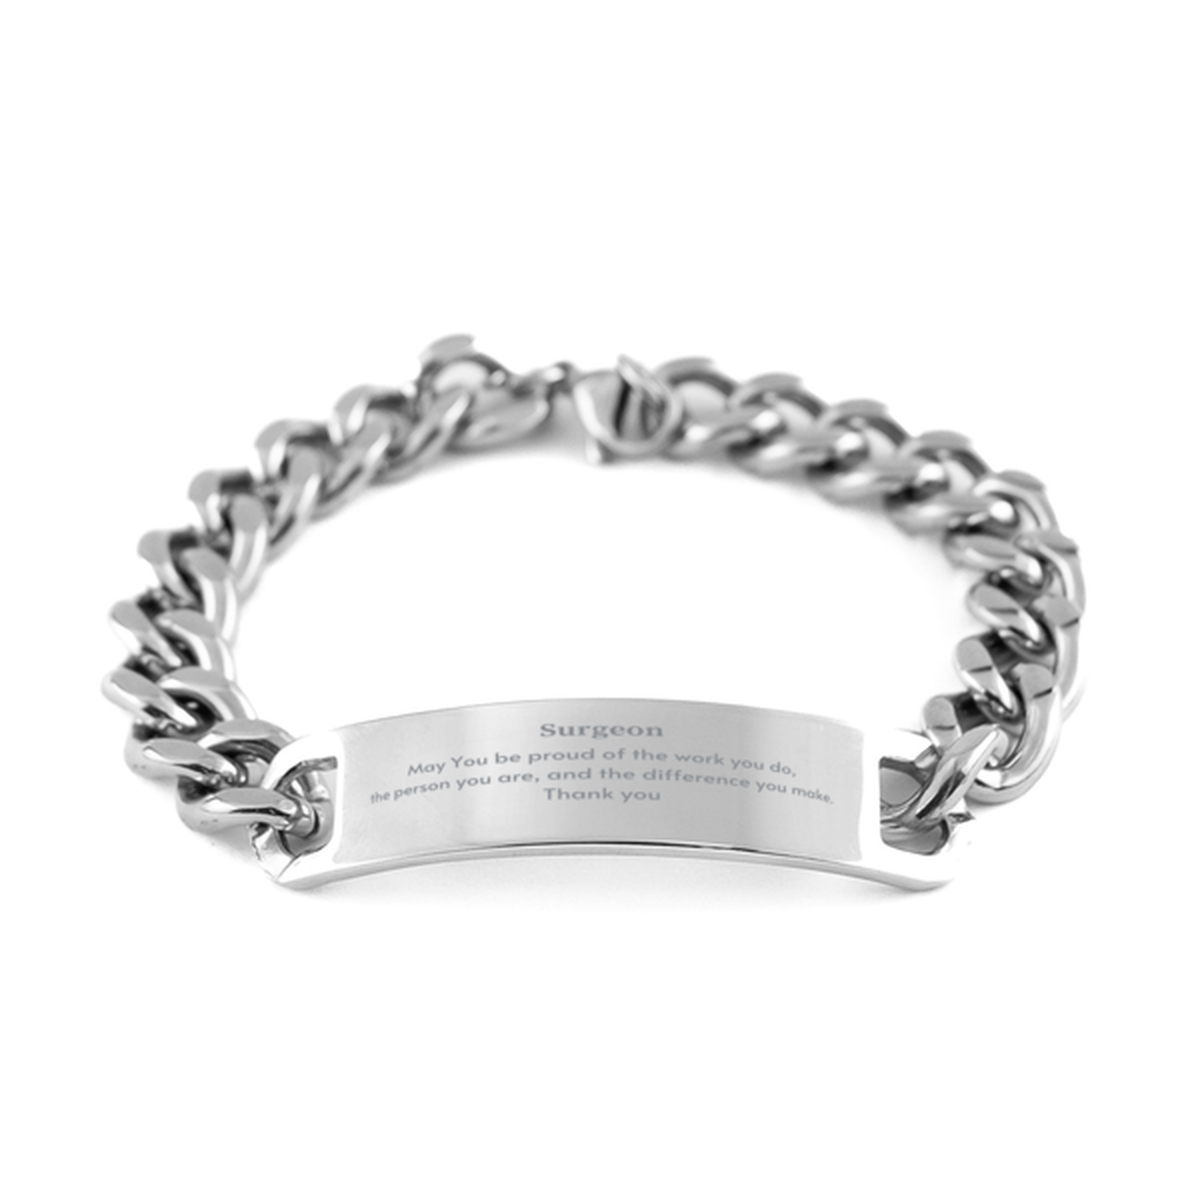 Heartwarming Cuban Chain Stainless Steel Bracelet Retirement Coworkers Gifts for Surgeon, Surgeon May You be proud of the work you do, the person you are Gifts for Boss Men Women Friends